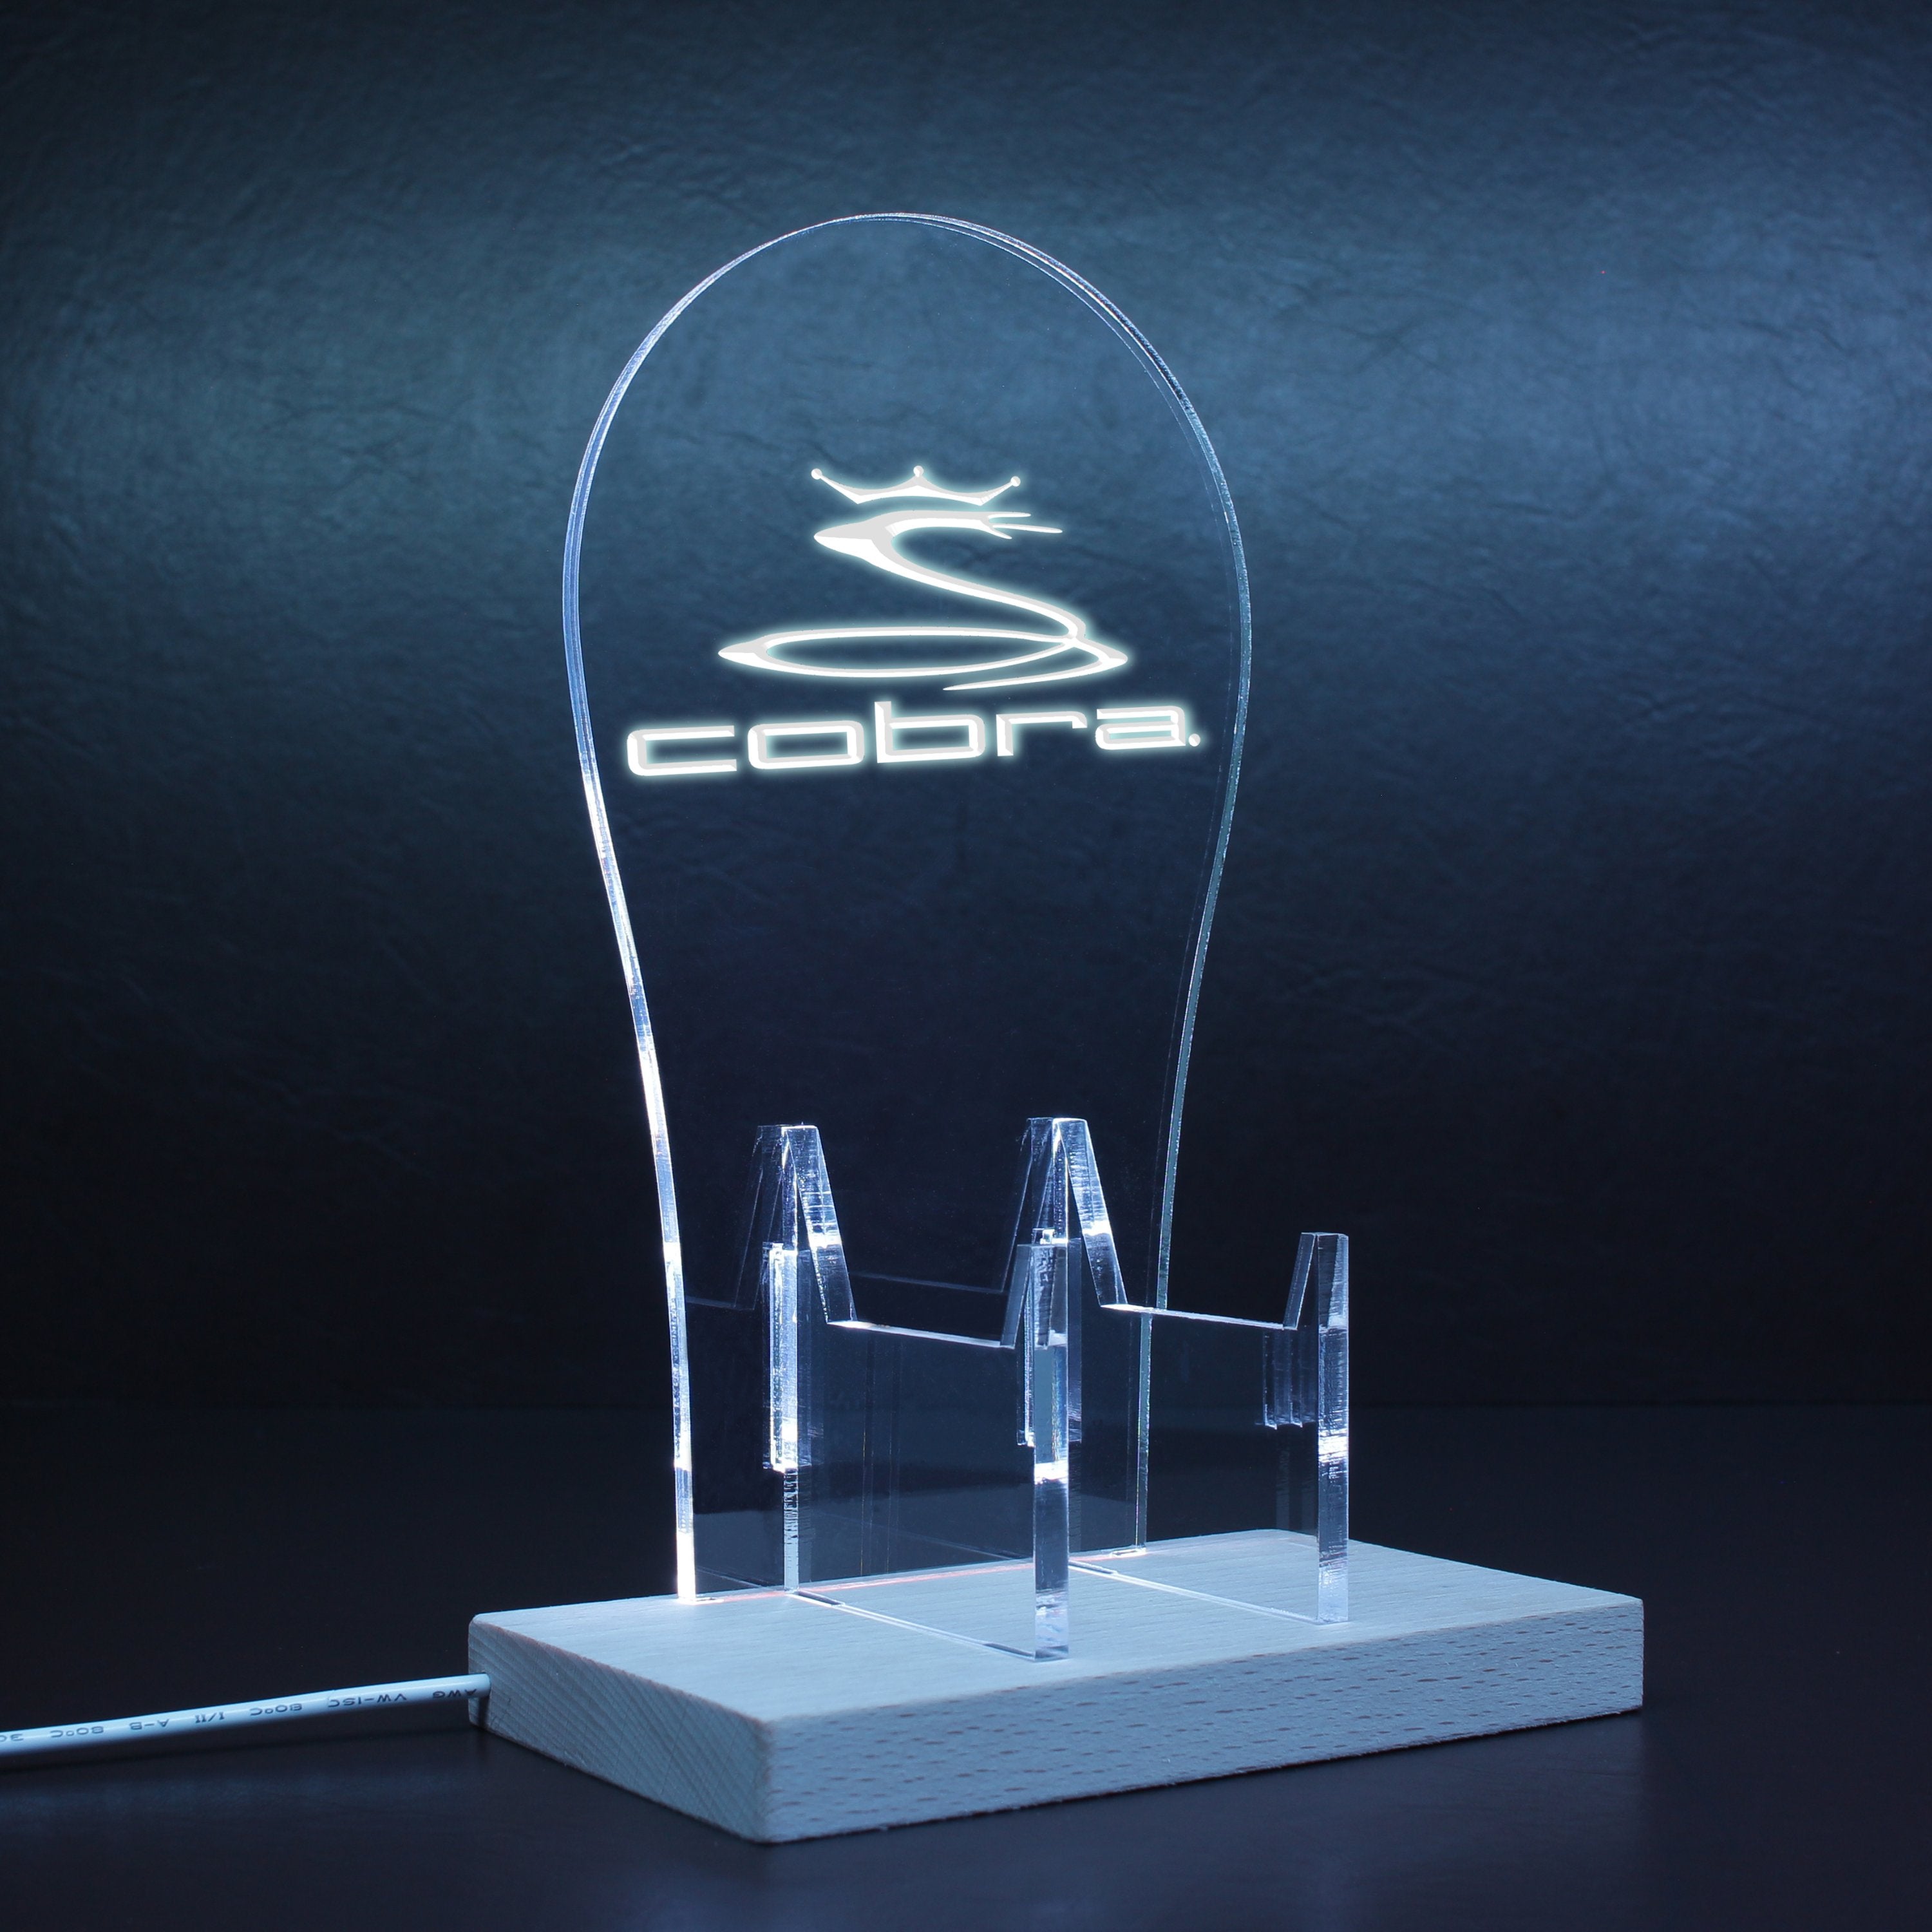 Cobra Golf LED Gaming Headset Controller Stand